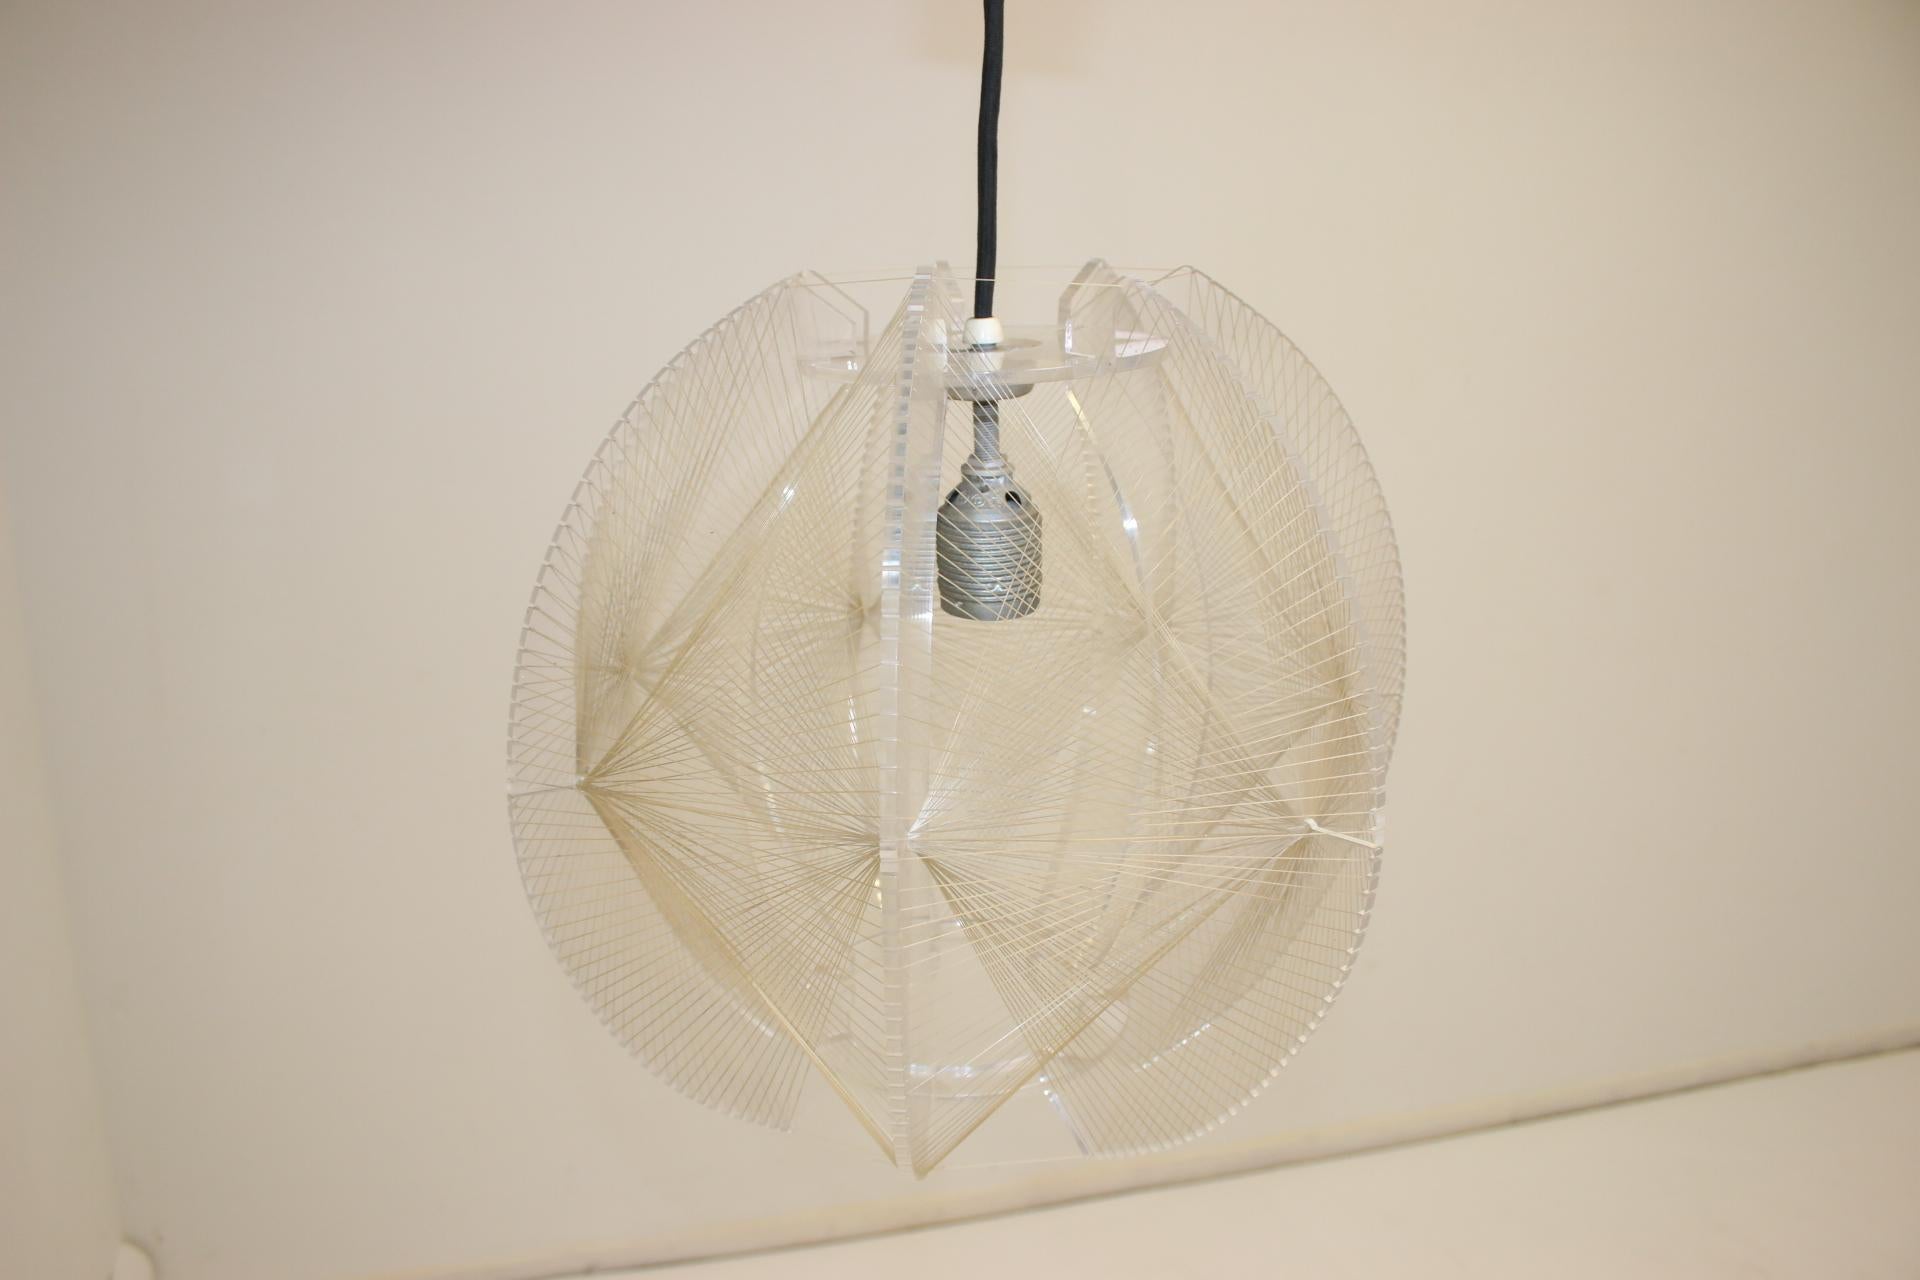 A beautiful ceiling lamp from the 60s, designed for Sompex by the French designer Paul Secon. 
The lamp has a clear plexiglass frame with threaded nylon filament plus chrome fixings. 
A perfect use of shape and materials for a lamp, it looks great